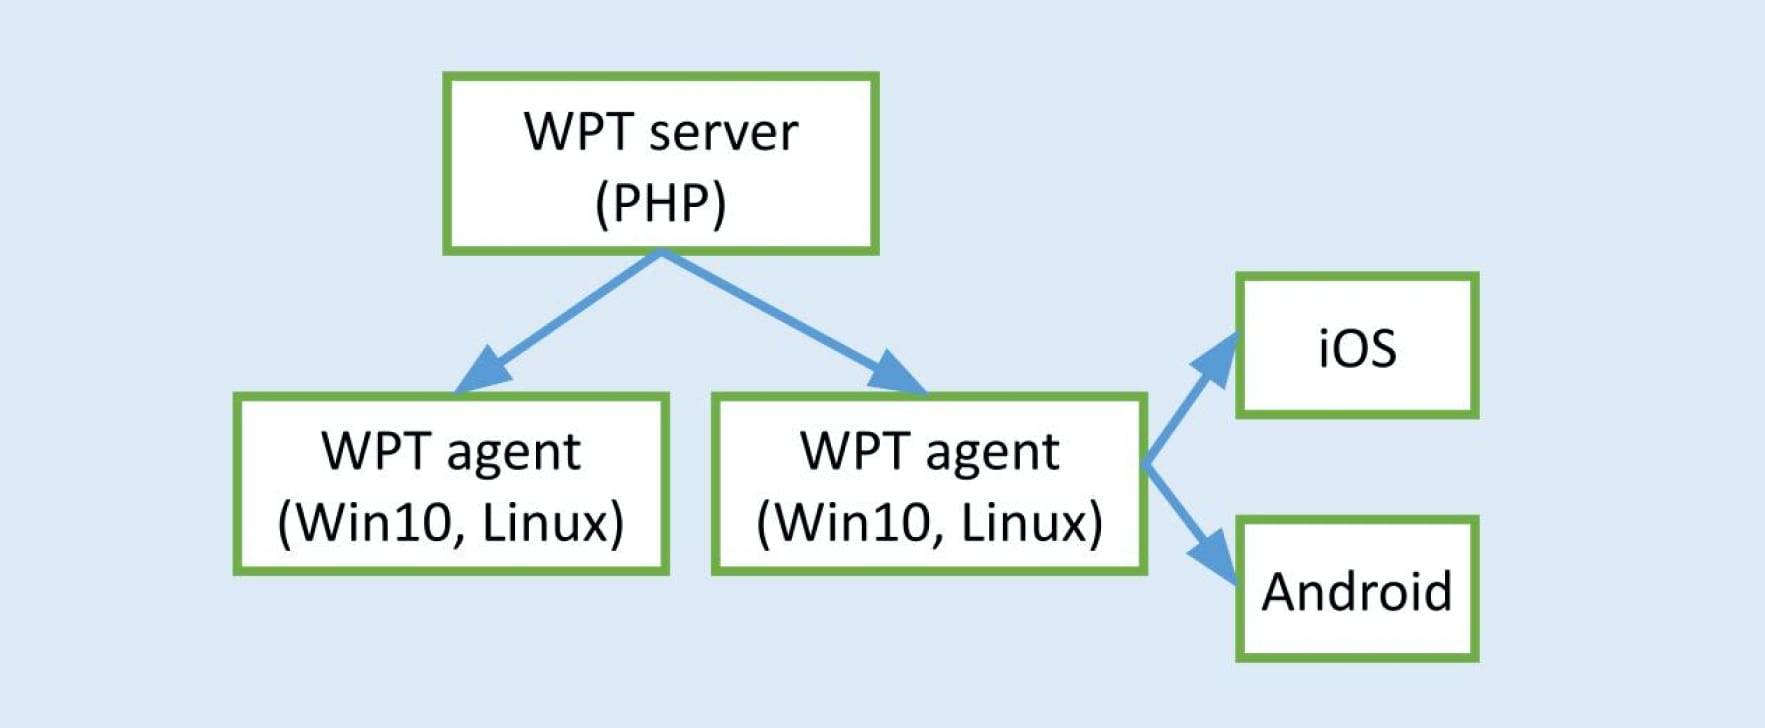 The diagram showing the WebPageTest architecture